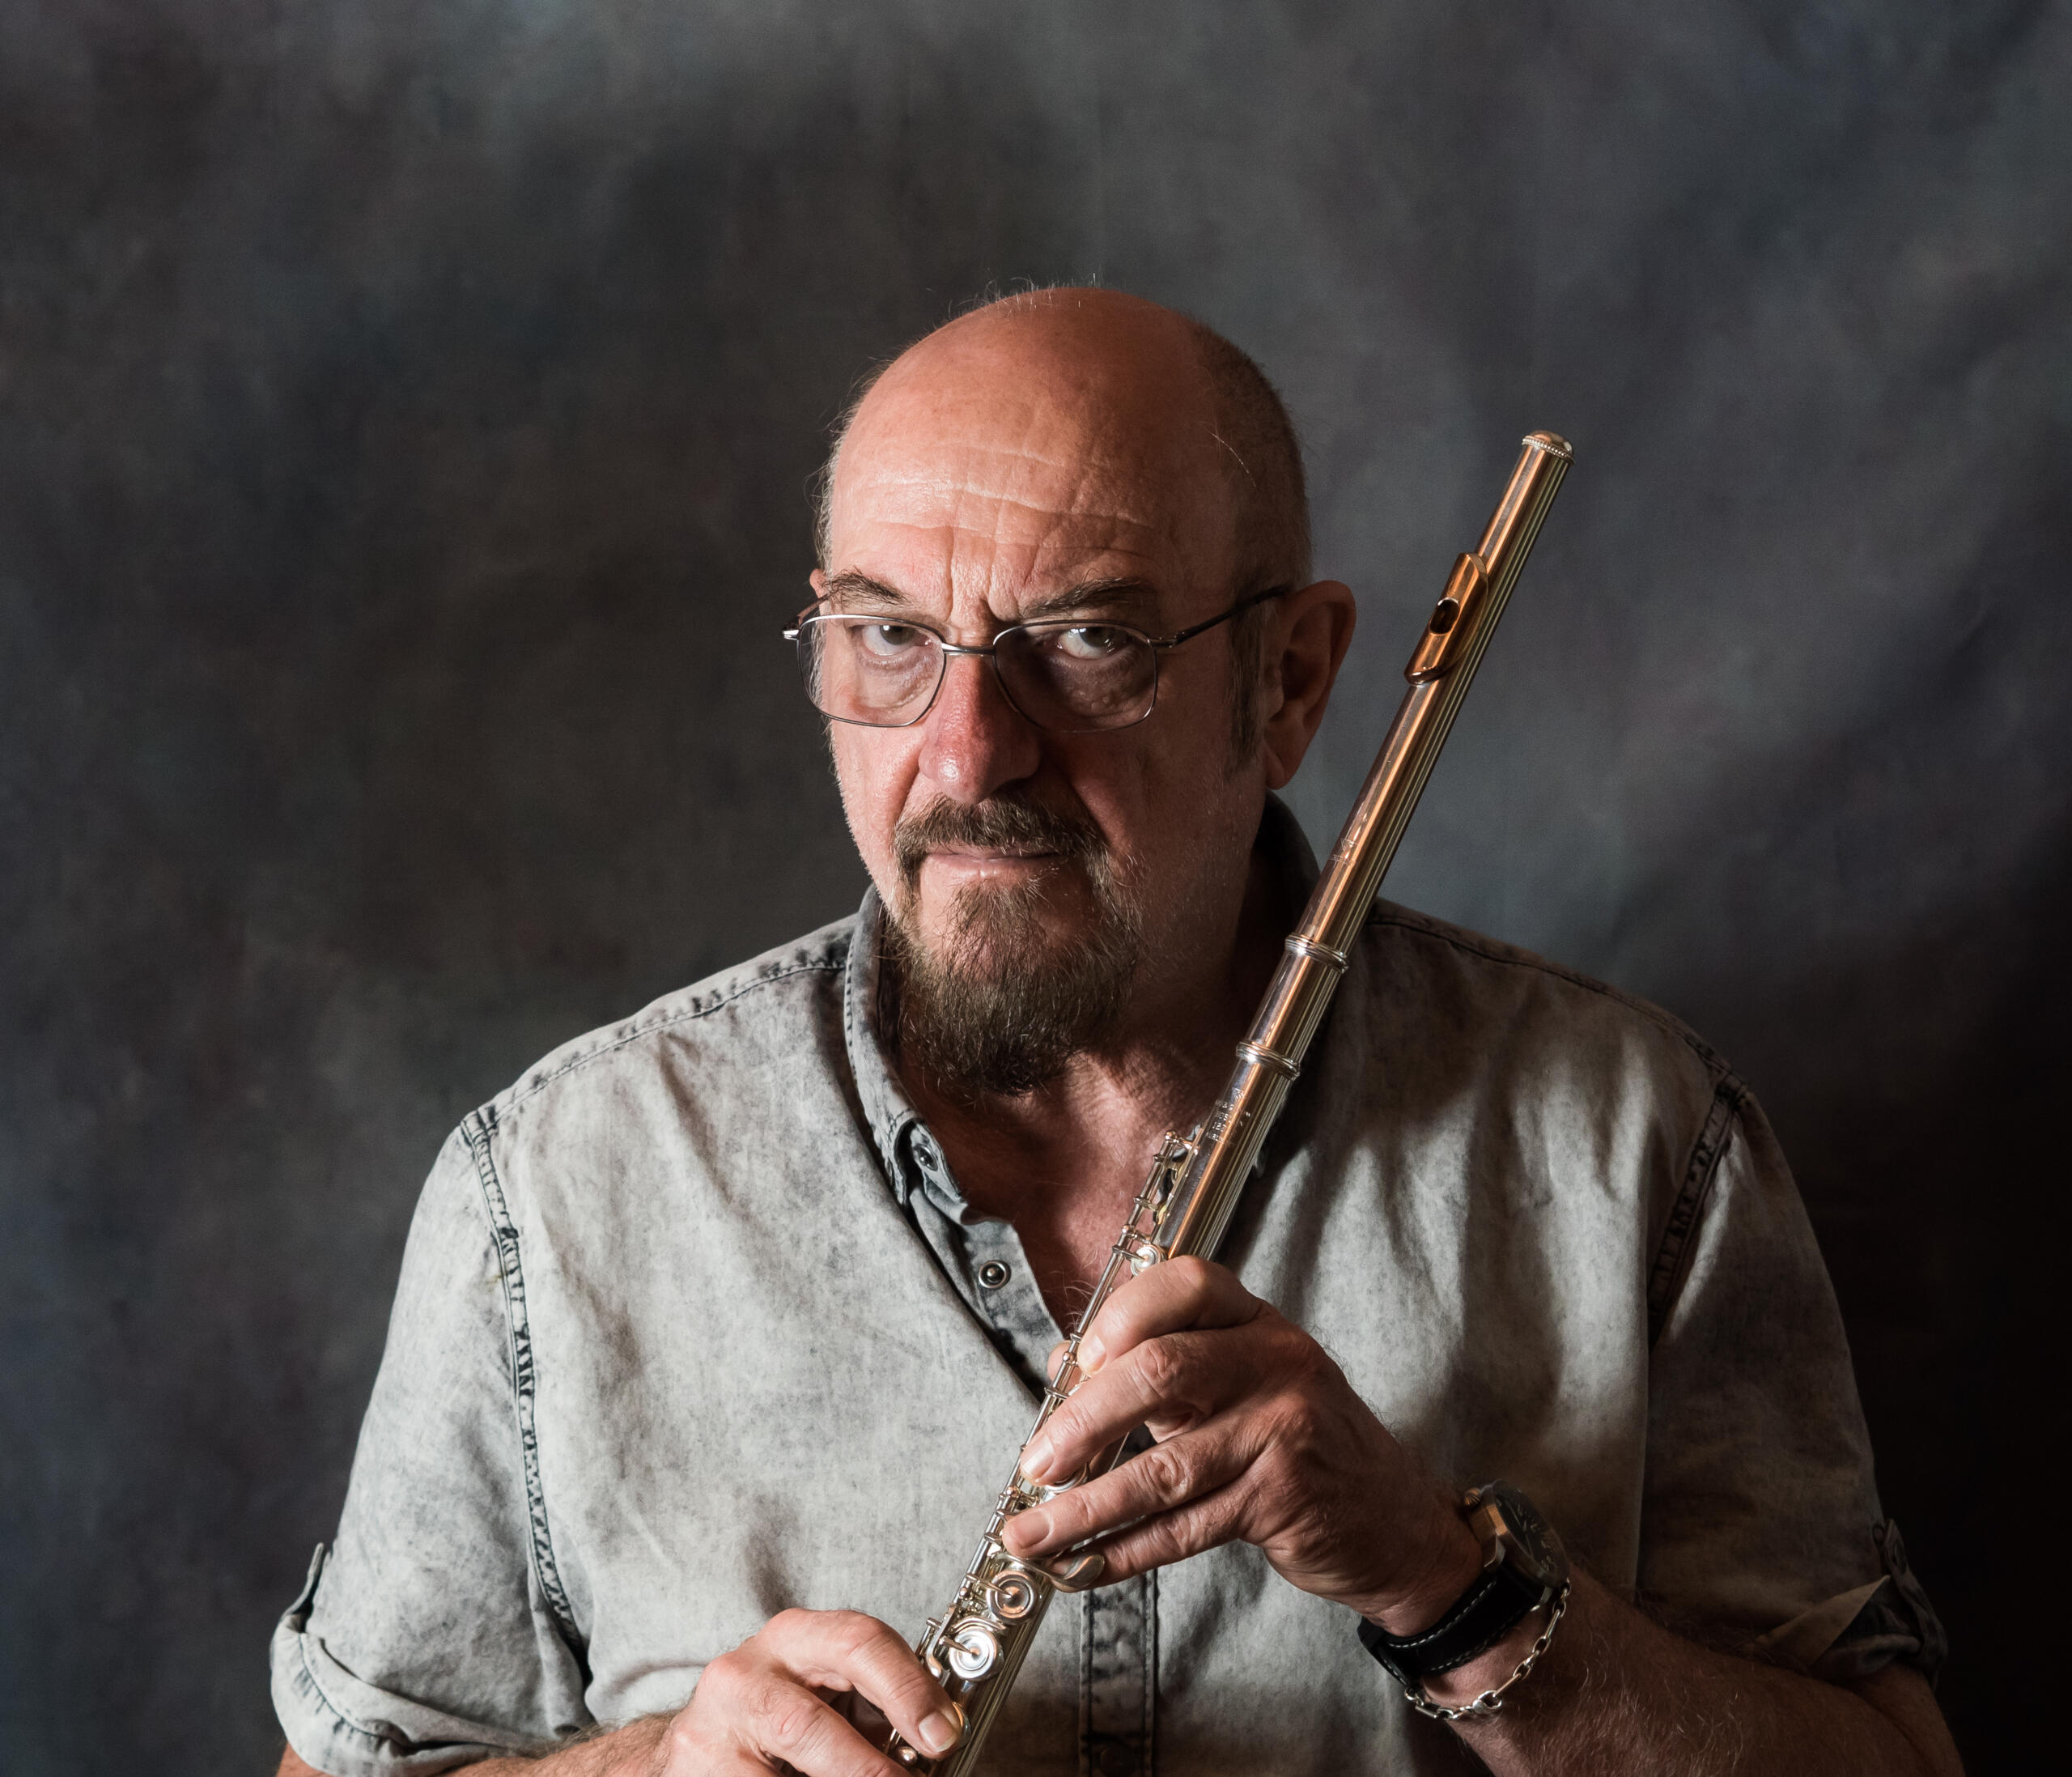 Portrait photograph of the frontman of the band Jethro Tull, Ian Anderson. He is standing in front of a grey mottled background, holding his flute in both hands and looking seriously into the camera.